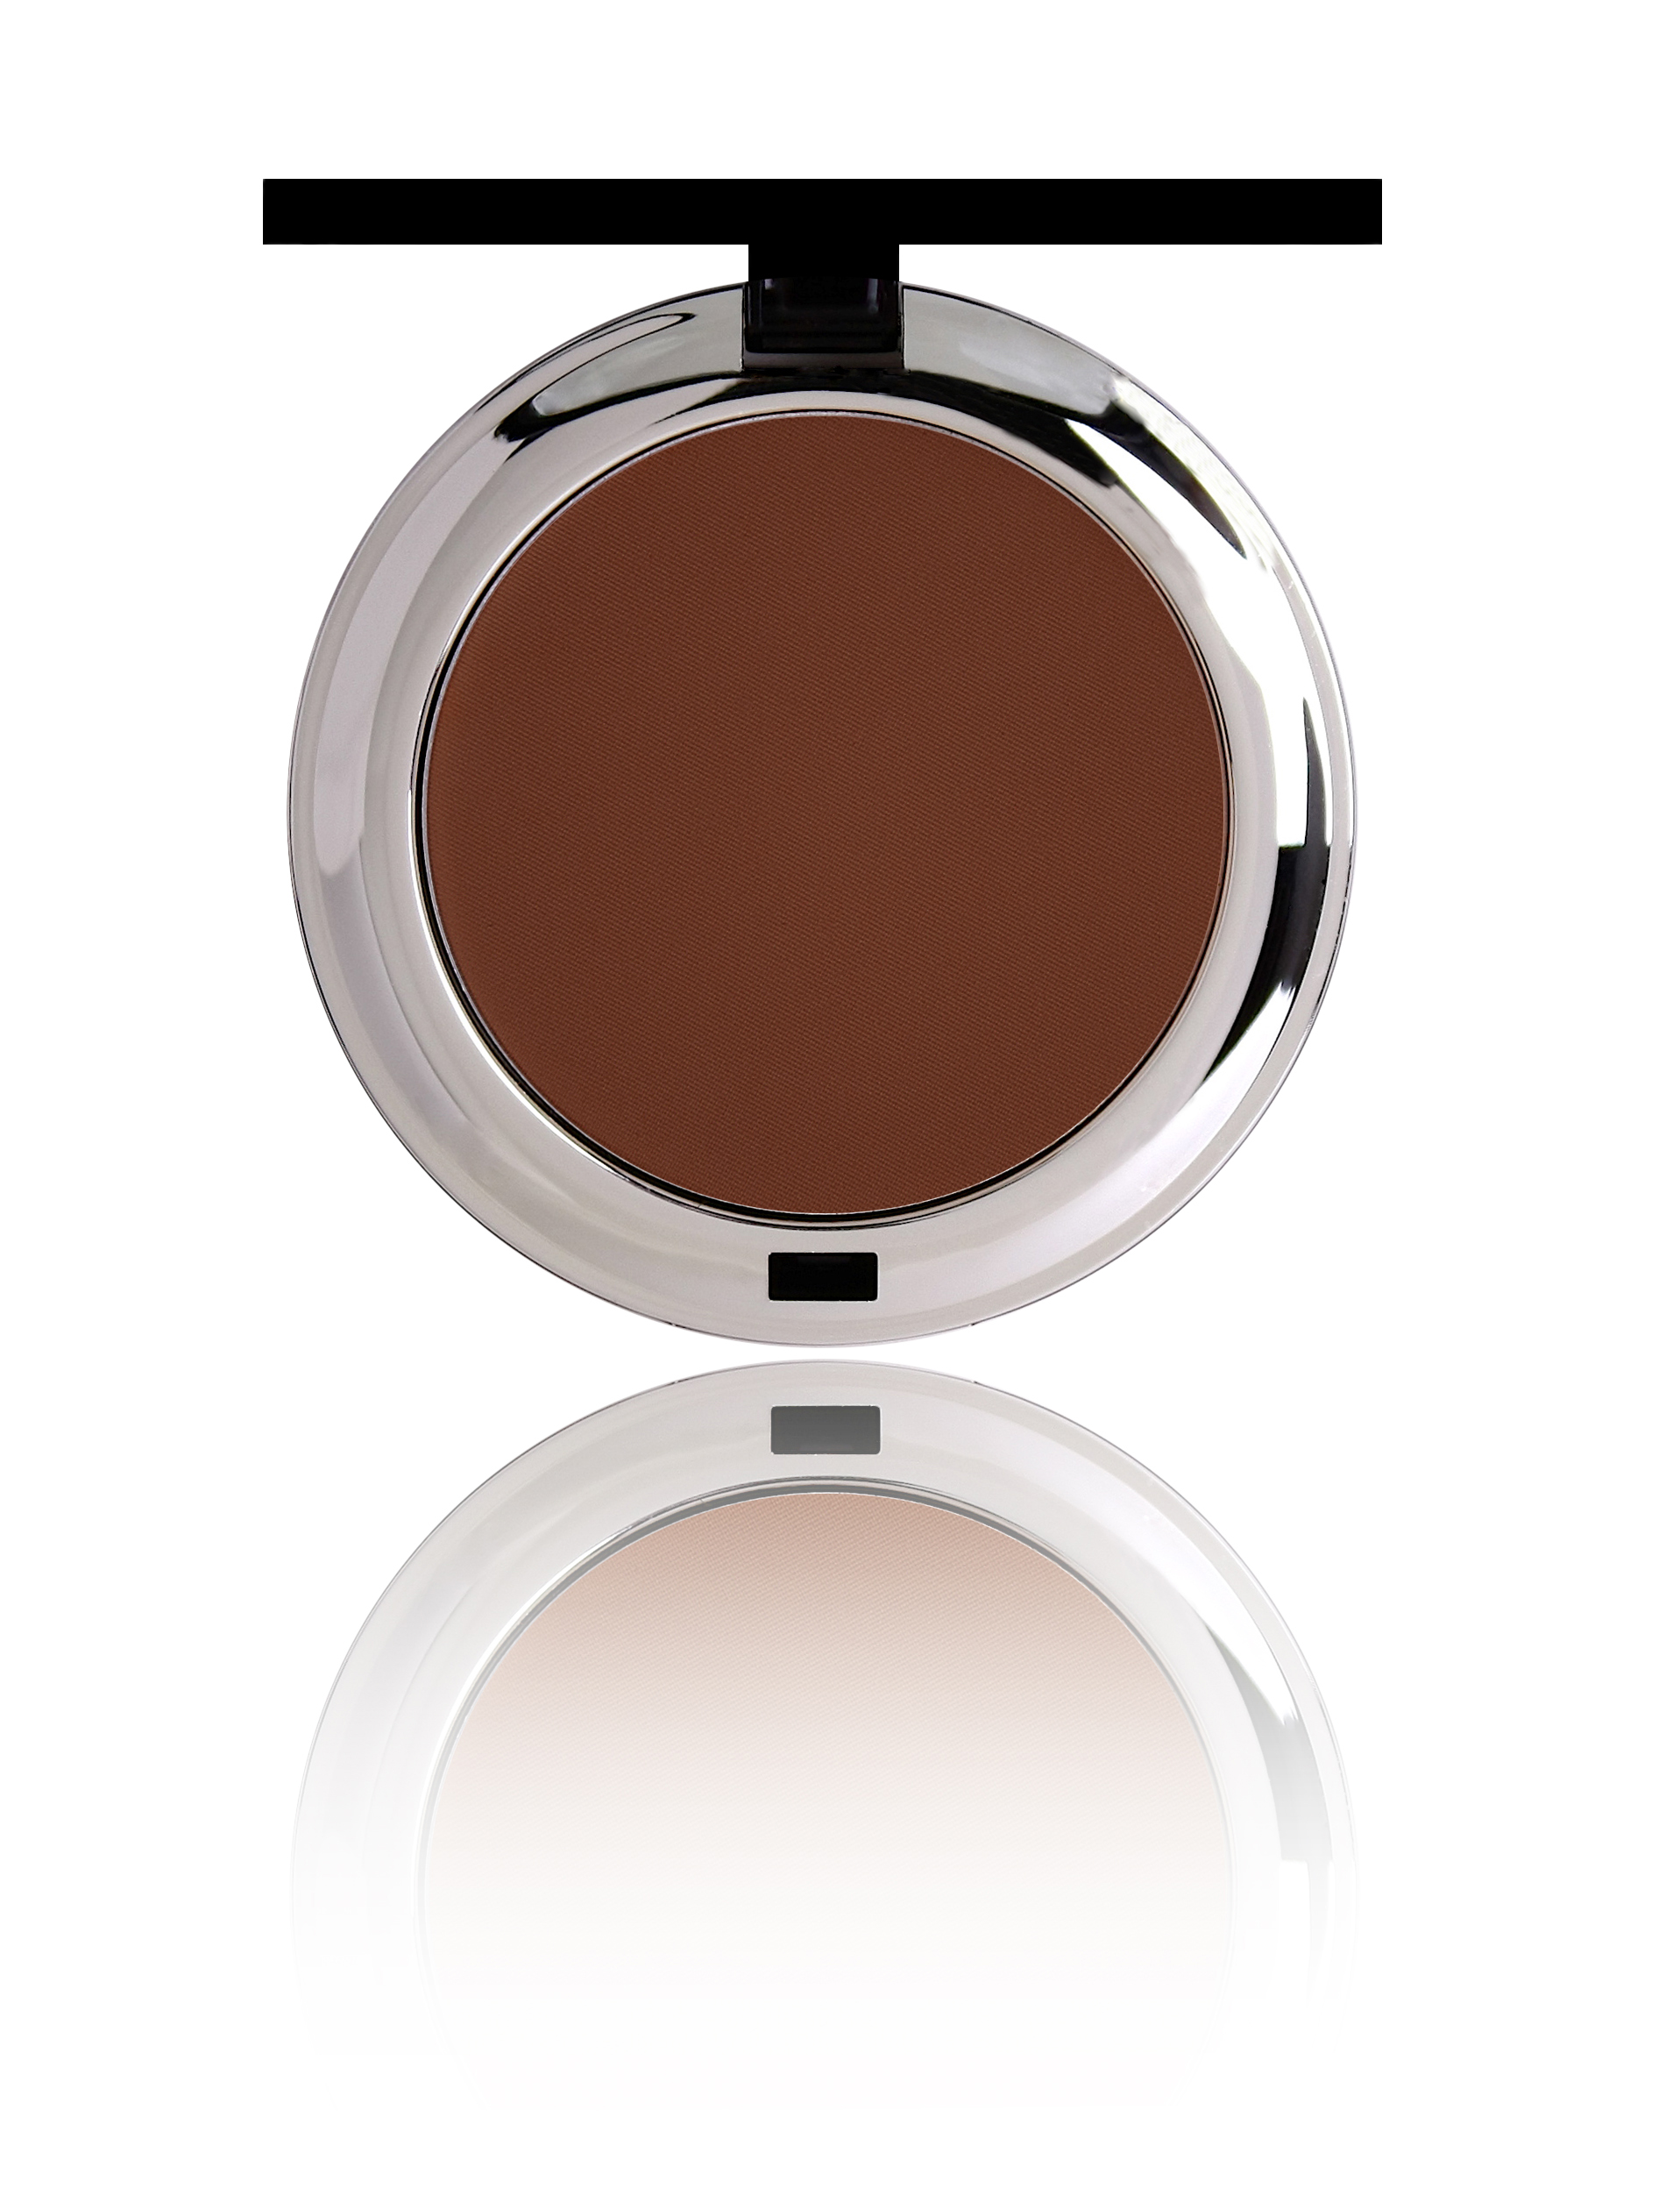 Bellapierre Mineral compact foundation Truffle